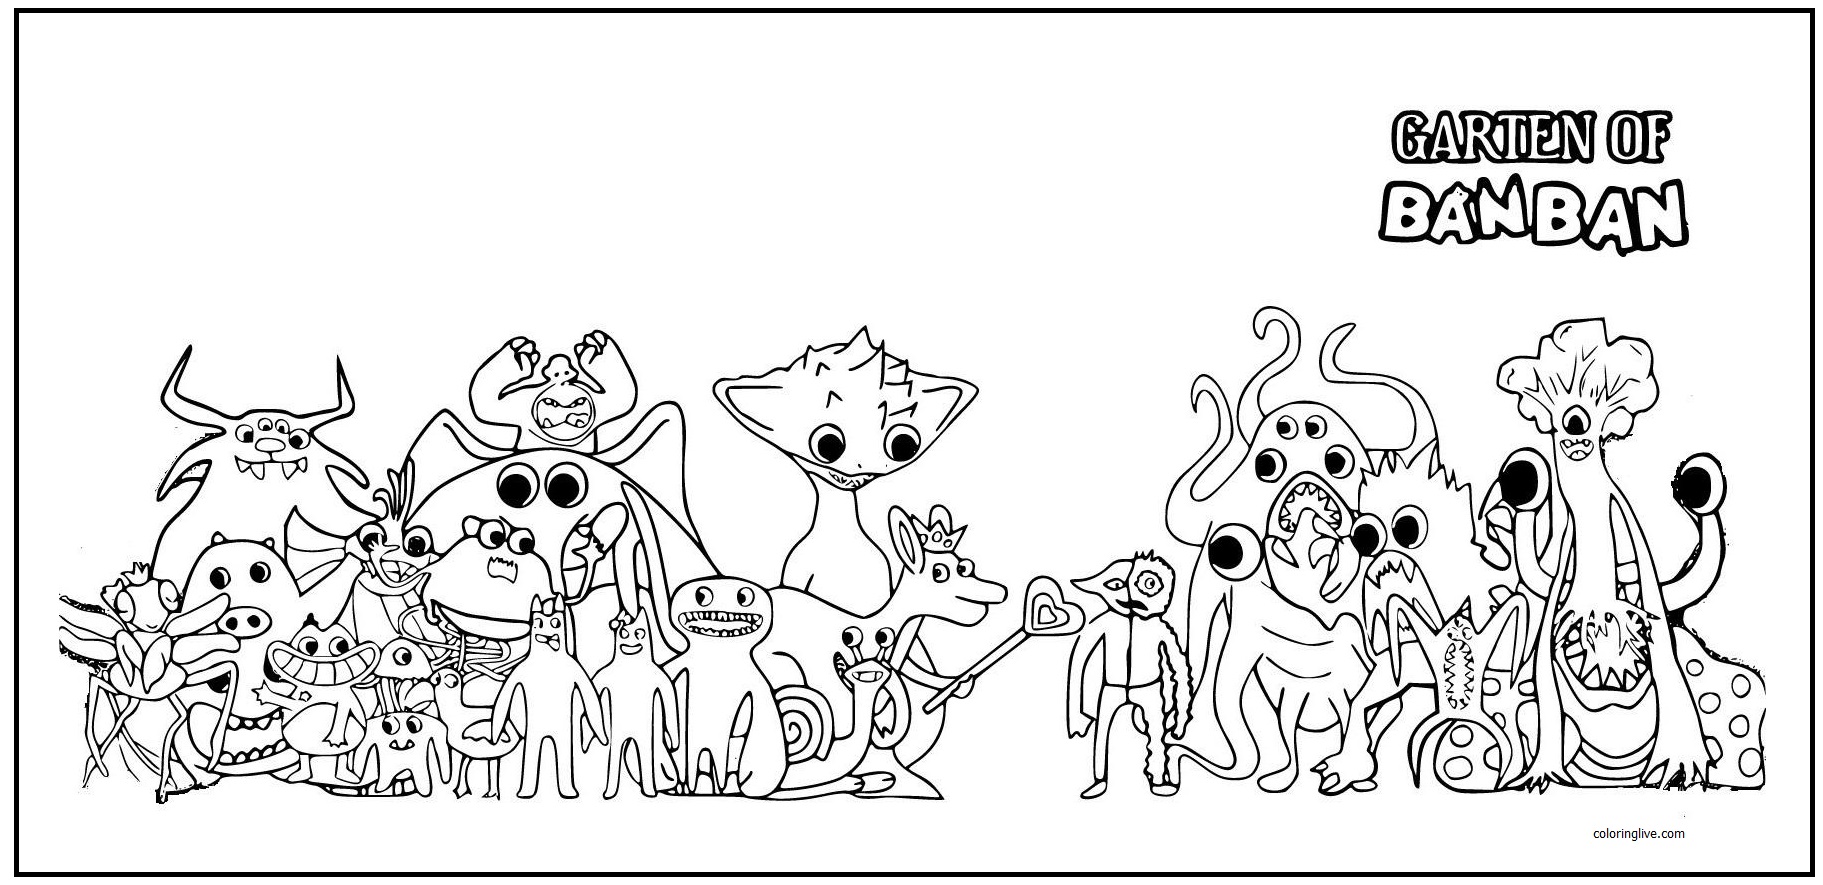 Printable Garten of Banban monsters Coloring Page for kids.